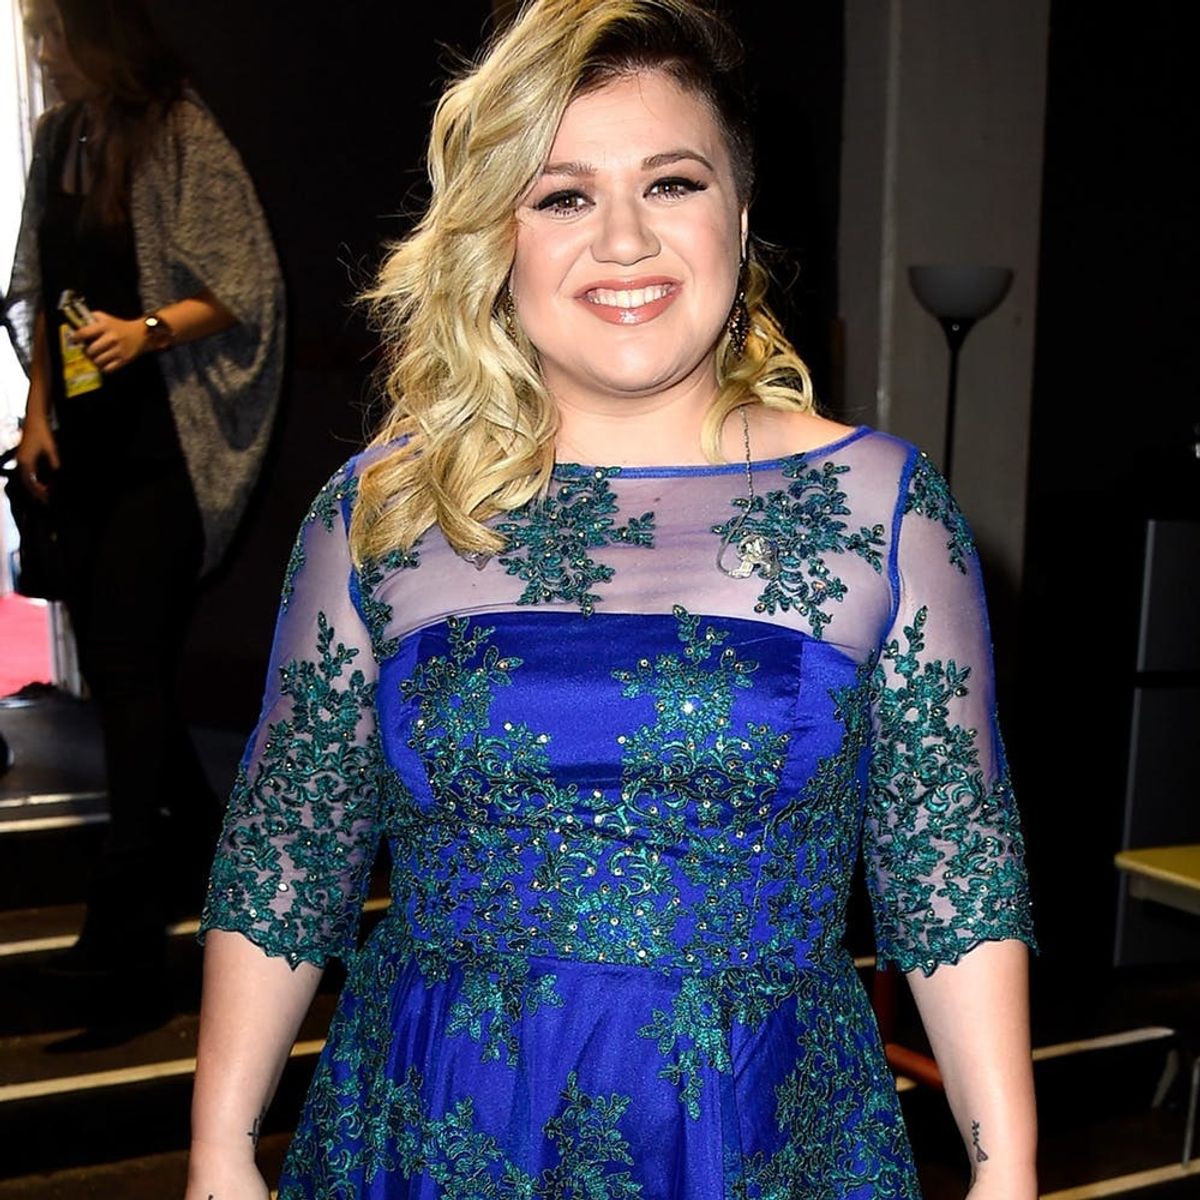 Kelly Clarkson Revealed Her Baby’s Gender in the Cutest Way - Brit + Co